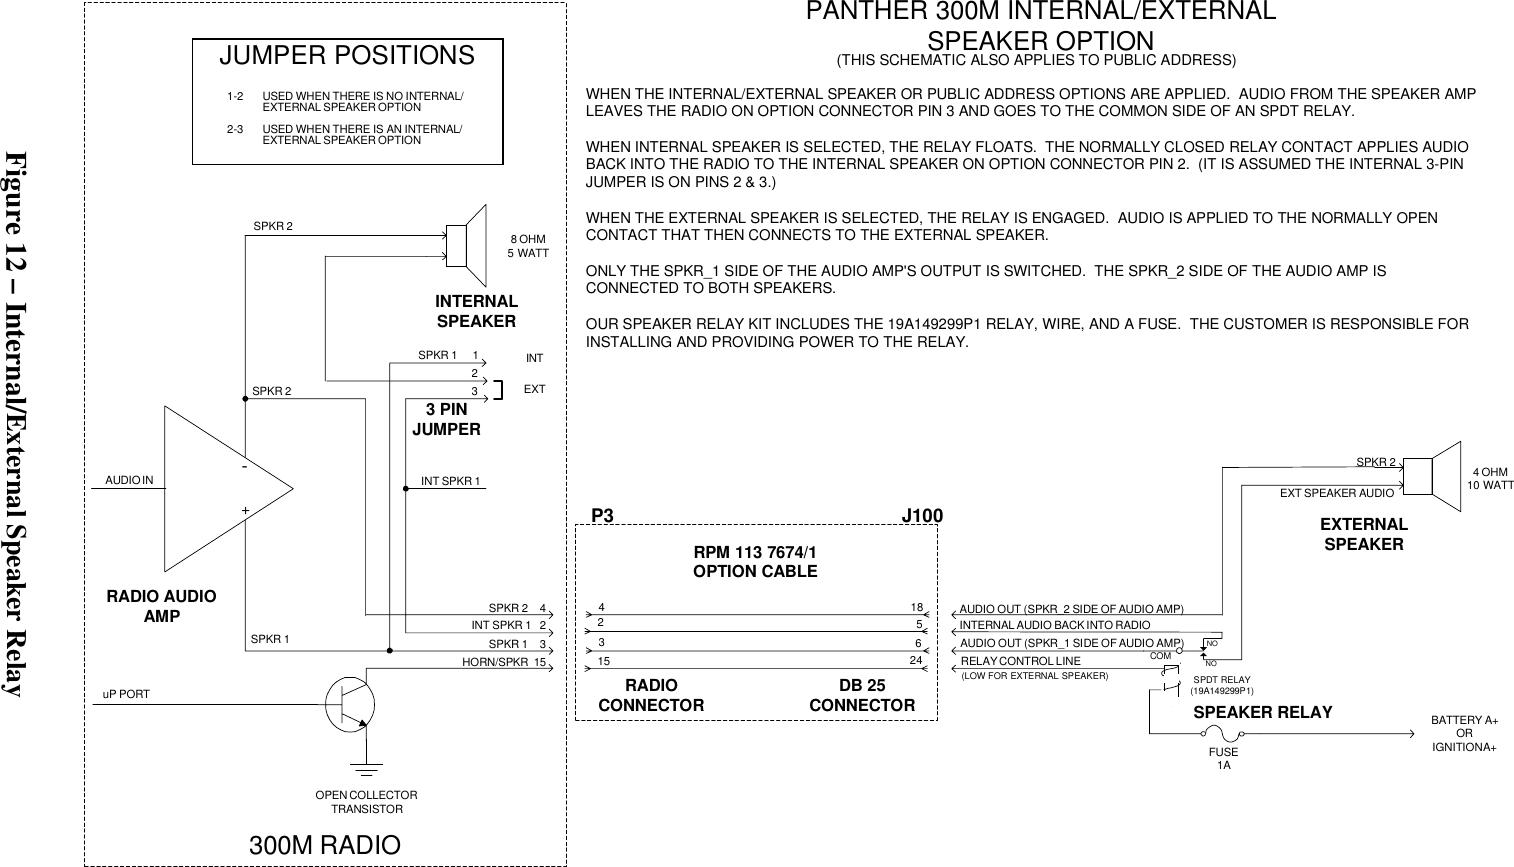 PANTHER 300M INTERNAL/EXTERNALSPEAKER OPTION(THIS SCHEMATIC ALSO APPLIES TO PUBLIC ADDRESS)WHEN THE INTERNAL/EXTERNAL SPEAKER OR PUBLIC ADDRESS OPTIONS ARE APPLIED.  AUDIO FROM THE SPEAKER AMPLEAVES THE RADIO ON OPTION CONNECTOR PIN 3 AND GOES TO THE COMMON SIDE OF AN SPDT RELAY.WHEN INTERNAL SPEAKER IS SELECTED, THE RELAY FLOATS.  THE NORMALLY CLOSED RELAY CONTACT APPLIES AUDIOBACK INTO THE RADIO TO THE INTERNAL SPEAKER ON OPTION CONNECTOR PIN 2.  (IT IS ASSUMED THE INTERNAL 3-PINJUMPER IS ON PINS 2 &amp; 3.)WHEN THE EXTERNAL SPEAKER IS SELECTED, THE RELAY IS ENGAGED.  AUDIO IS APPLIED TO THE NORMALLY OPENCONTACT THAT THEN CONNECTS TO THE EXTERNAL SPEAKER.ONLY THE SPKR_1 SIDE OF THE AUDIO AMP&apos;S OUTPUT IS SWITCHED.  THE SPKR_2 SIDE OF THE AUDIO AMP ISCONNECTED TO BOTH SPEAKERS.OUR SPEAKER RELAY KIT INCLUDES THE 19A149299P1 RELAY, WIRE, AND A FUSE.  THE CUSTOMER IS RESPONSIBLE FORINSTALLING AND PROVIDING POWER TO THE RELAY.JUMPER POSITIONS1-2 USED WHEN THERE IS NO INTERNAL/EXTERNAL SPEAKER OPTION2-3 USED WHEN THERE IS AN INTERNAL/EXTERNAL SPEAKER OPTION-+AUDIO INRADIO AUDIOAMPINTERNALSPEAKER3 PINJUMPERuP PORTOPEN COLLECTORTRANSISTORHORN/SPKR  15SPKR 1    3INT SPKR 1   2SPKR 2    4INT SPKR 132SPKR 1     1SPKR 2SPKR 2SPKR 18 OHM5 WATTINTEXT300M RADIORPM 113 7674/1OPTION CABLERADIOCONNECTOR DB 25CONNECTOR42315185624P3 J100AUDIO OUT (SPKR_2 SIDE OF AUDIO AMP)INTERNAL AUDIO BACK INTO RADIOAUDIO OUT (SPKR_1 SIDE OF AUDIO AMP)RELAY CONTROL LINE COMSPDT RELAY(19A149299P1)SPEAKER RELAYFUSE1ABATTERY A+ORIGNITION A+EXTERNALSPEAKER4 OHM10 WATTEXT SPEAKER AUDIOSPKR 2NONO(LOW FOR EXTERNAL SPEAKER)Figure 12 – Internal/External Speaker Relay